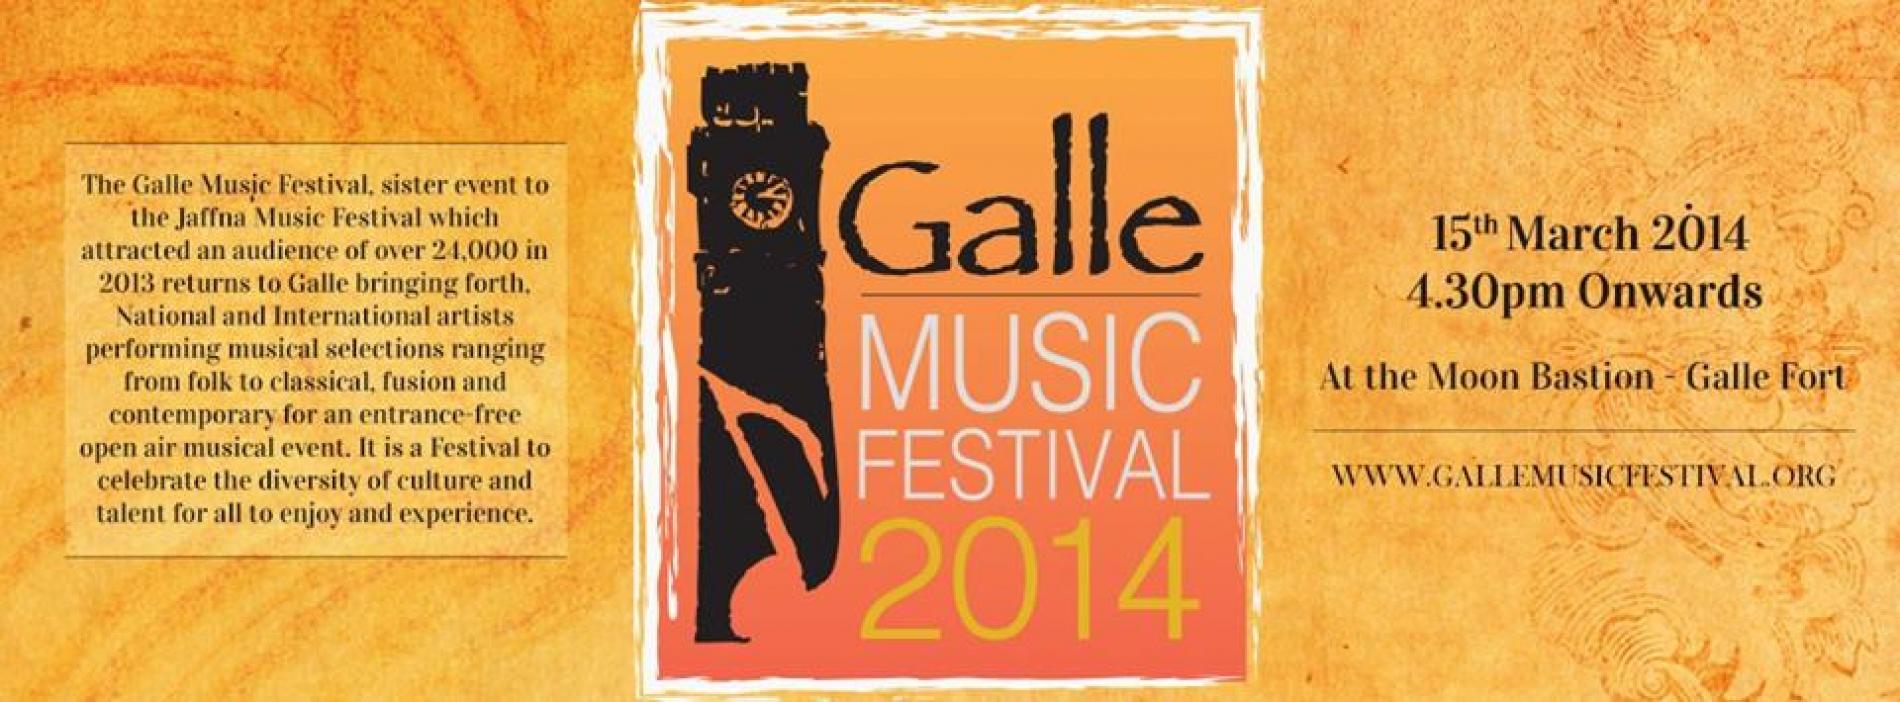 Galle Music Festival 2014: Galle